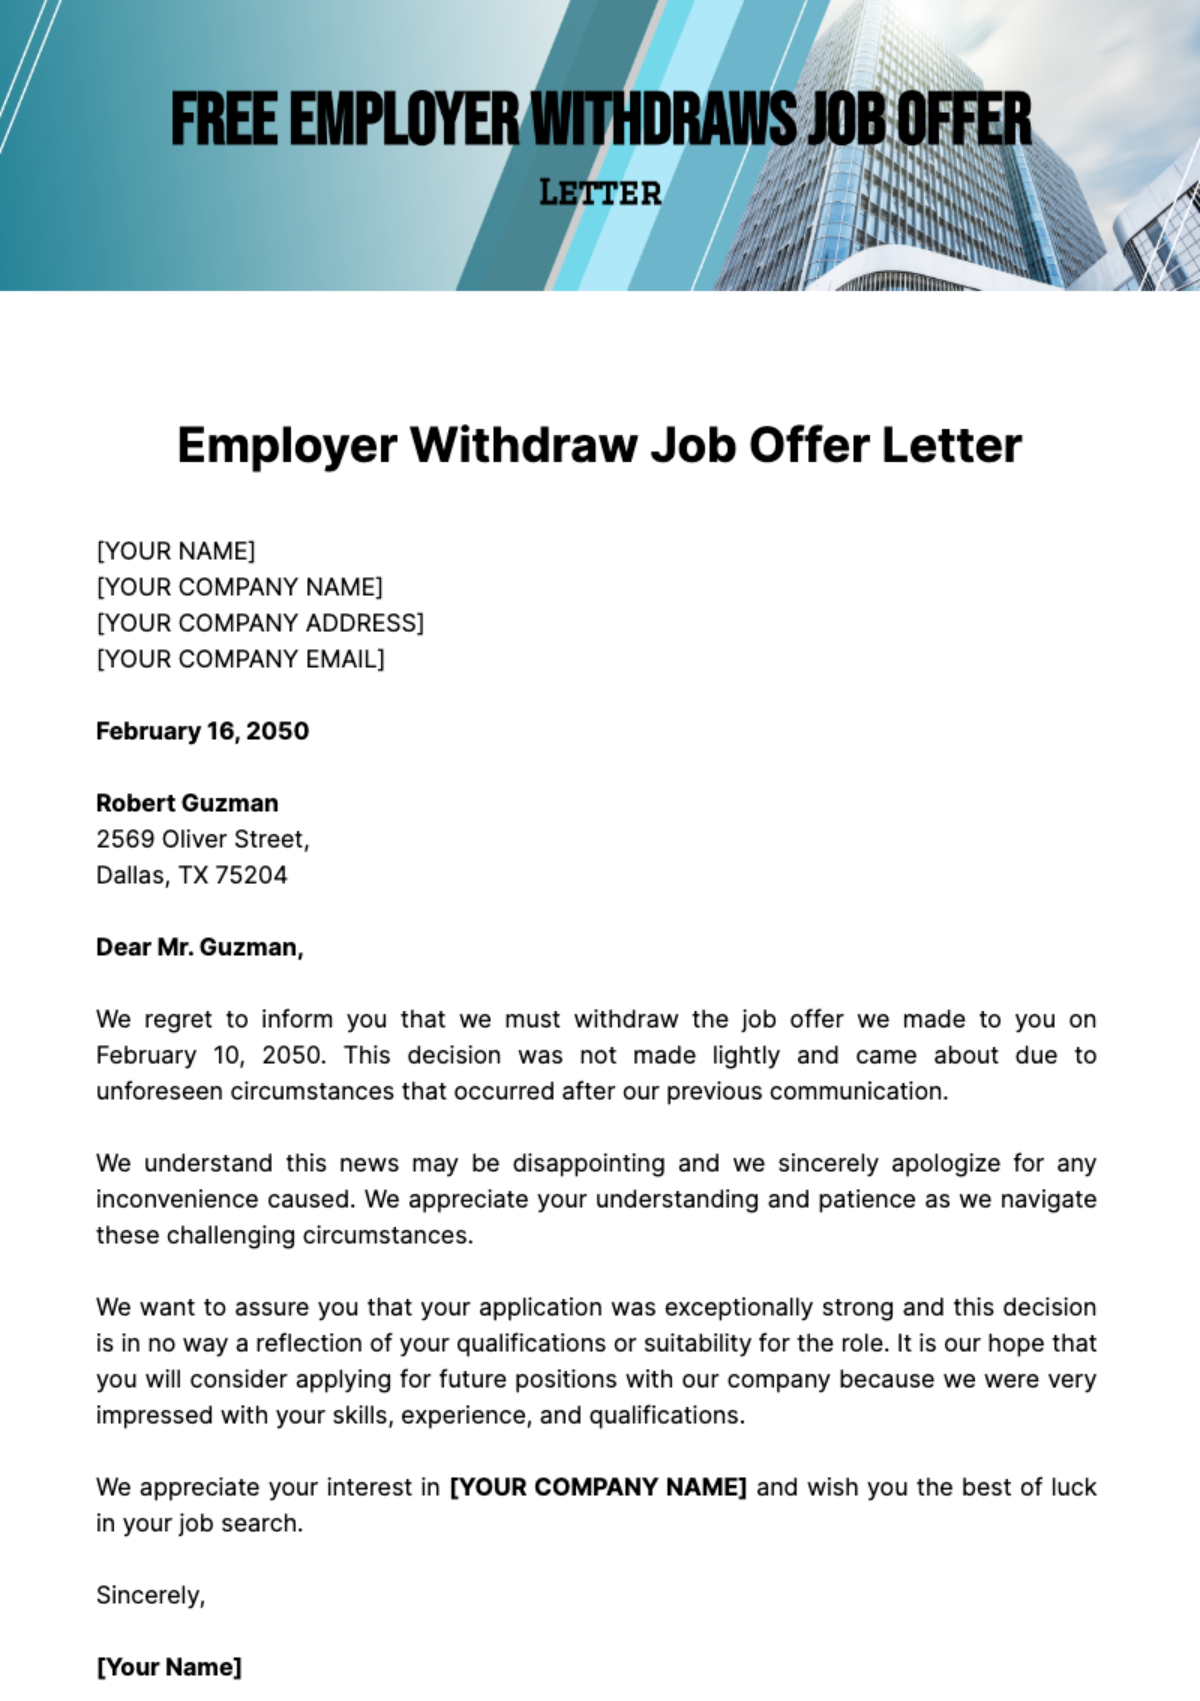 Free Employer Withdraw Job Offer Letter Template